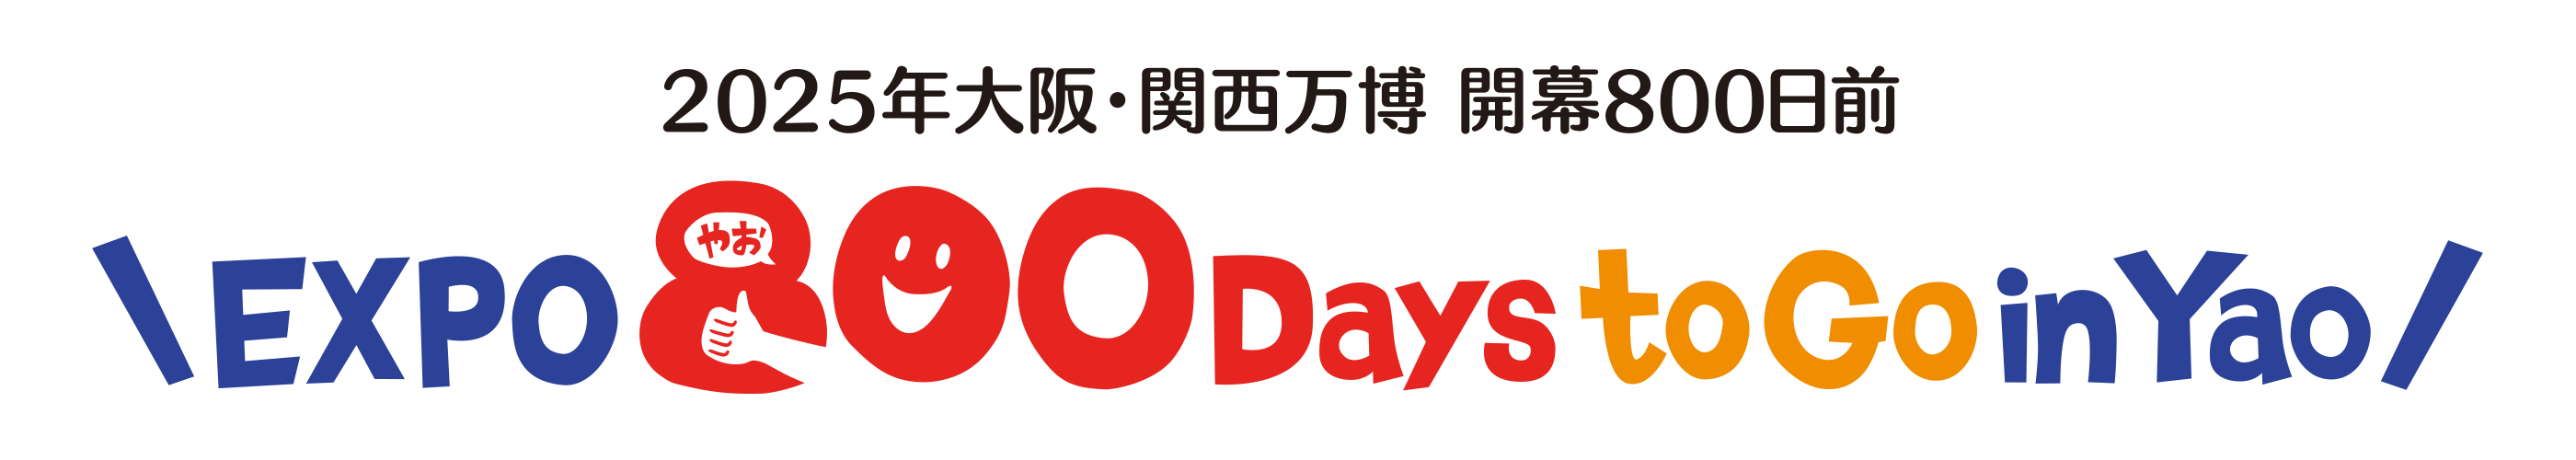 ＼EXPO 800 Days to Go in Yao／ロゴ